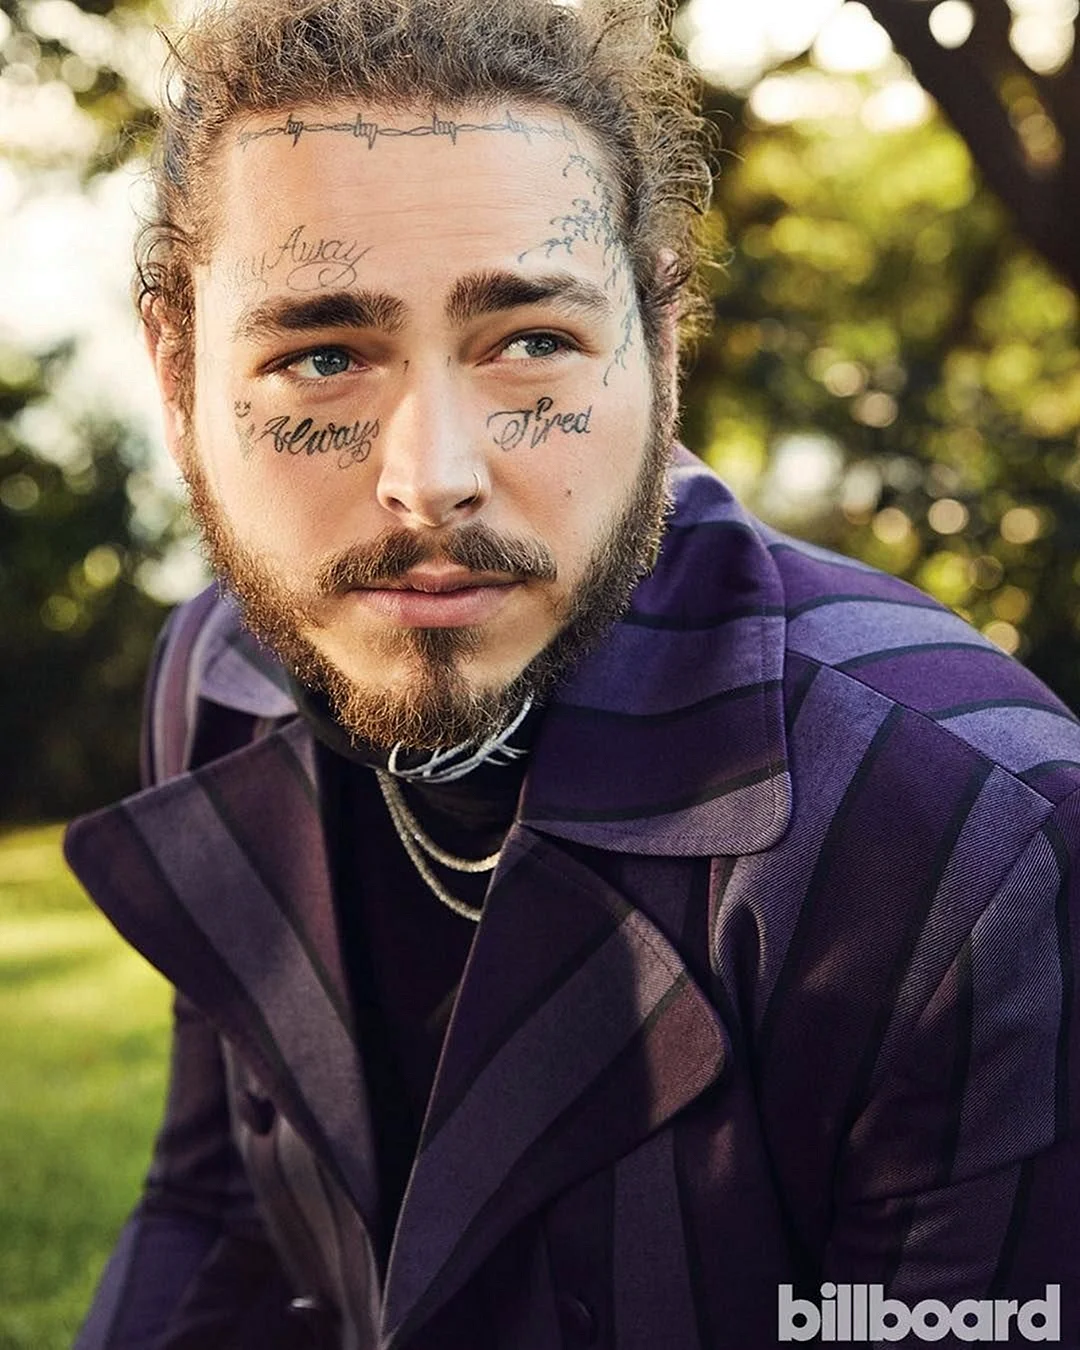 Post Malone Photoshoot Wallpaper For iPhone